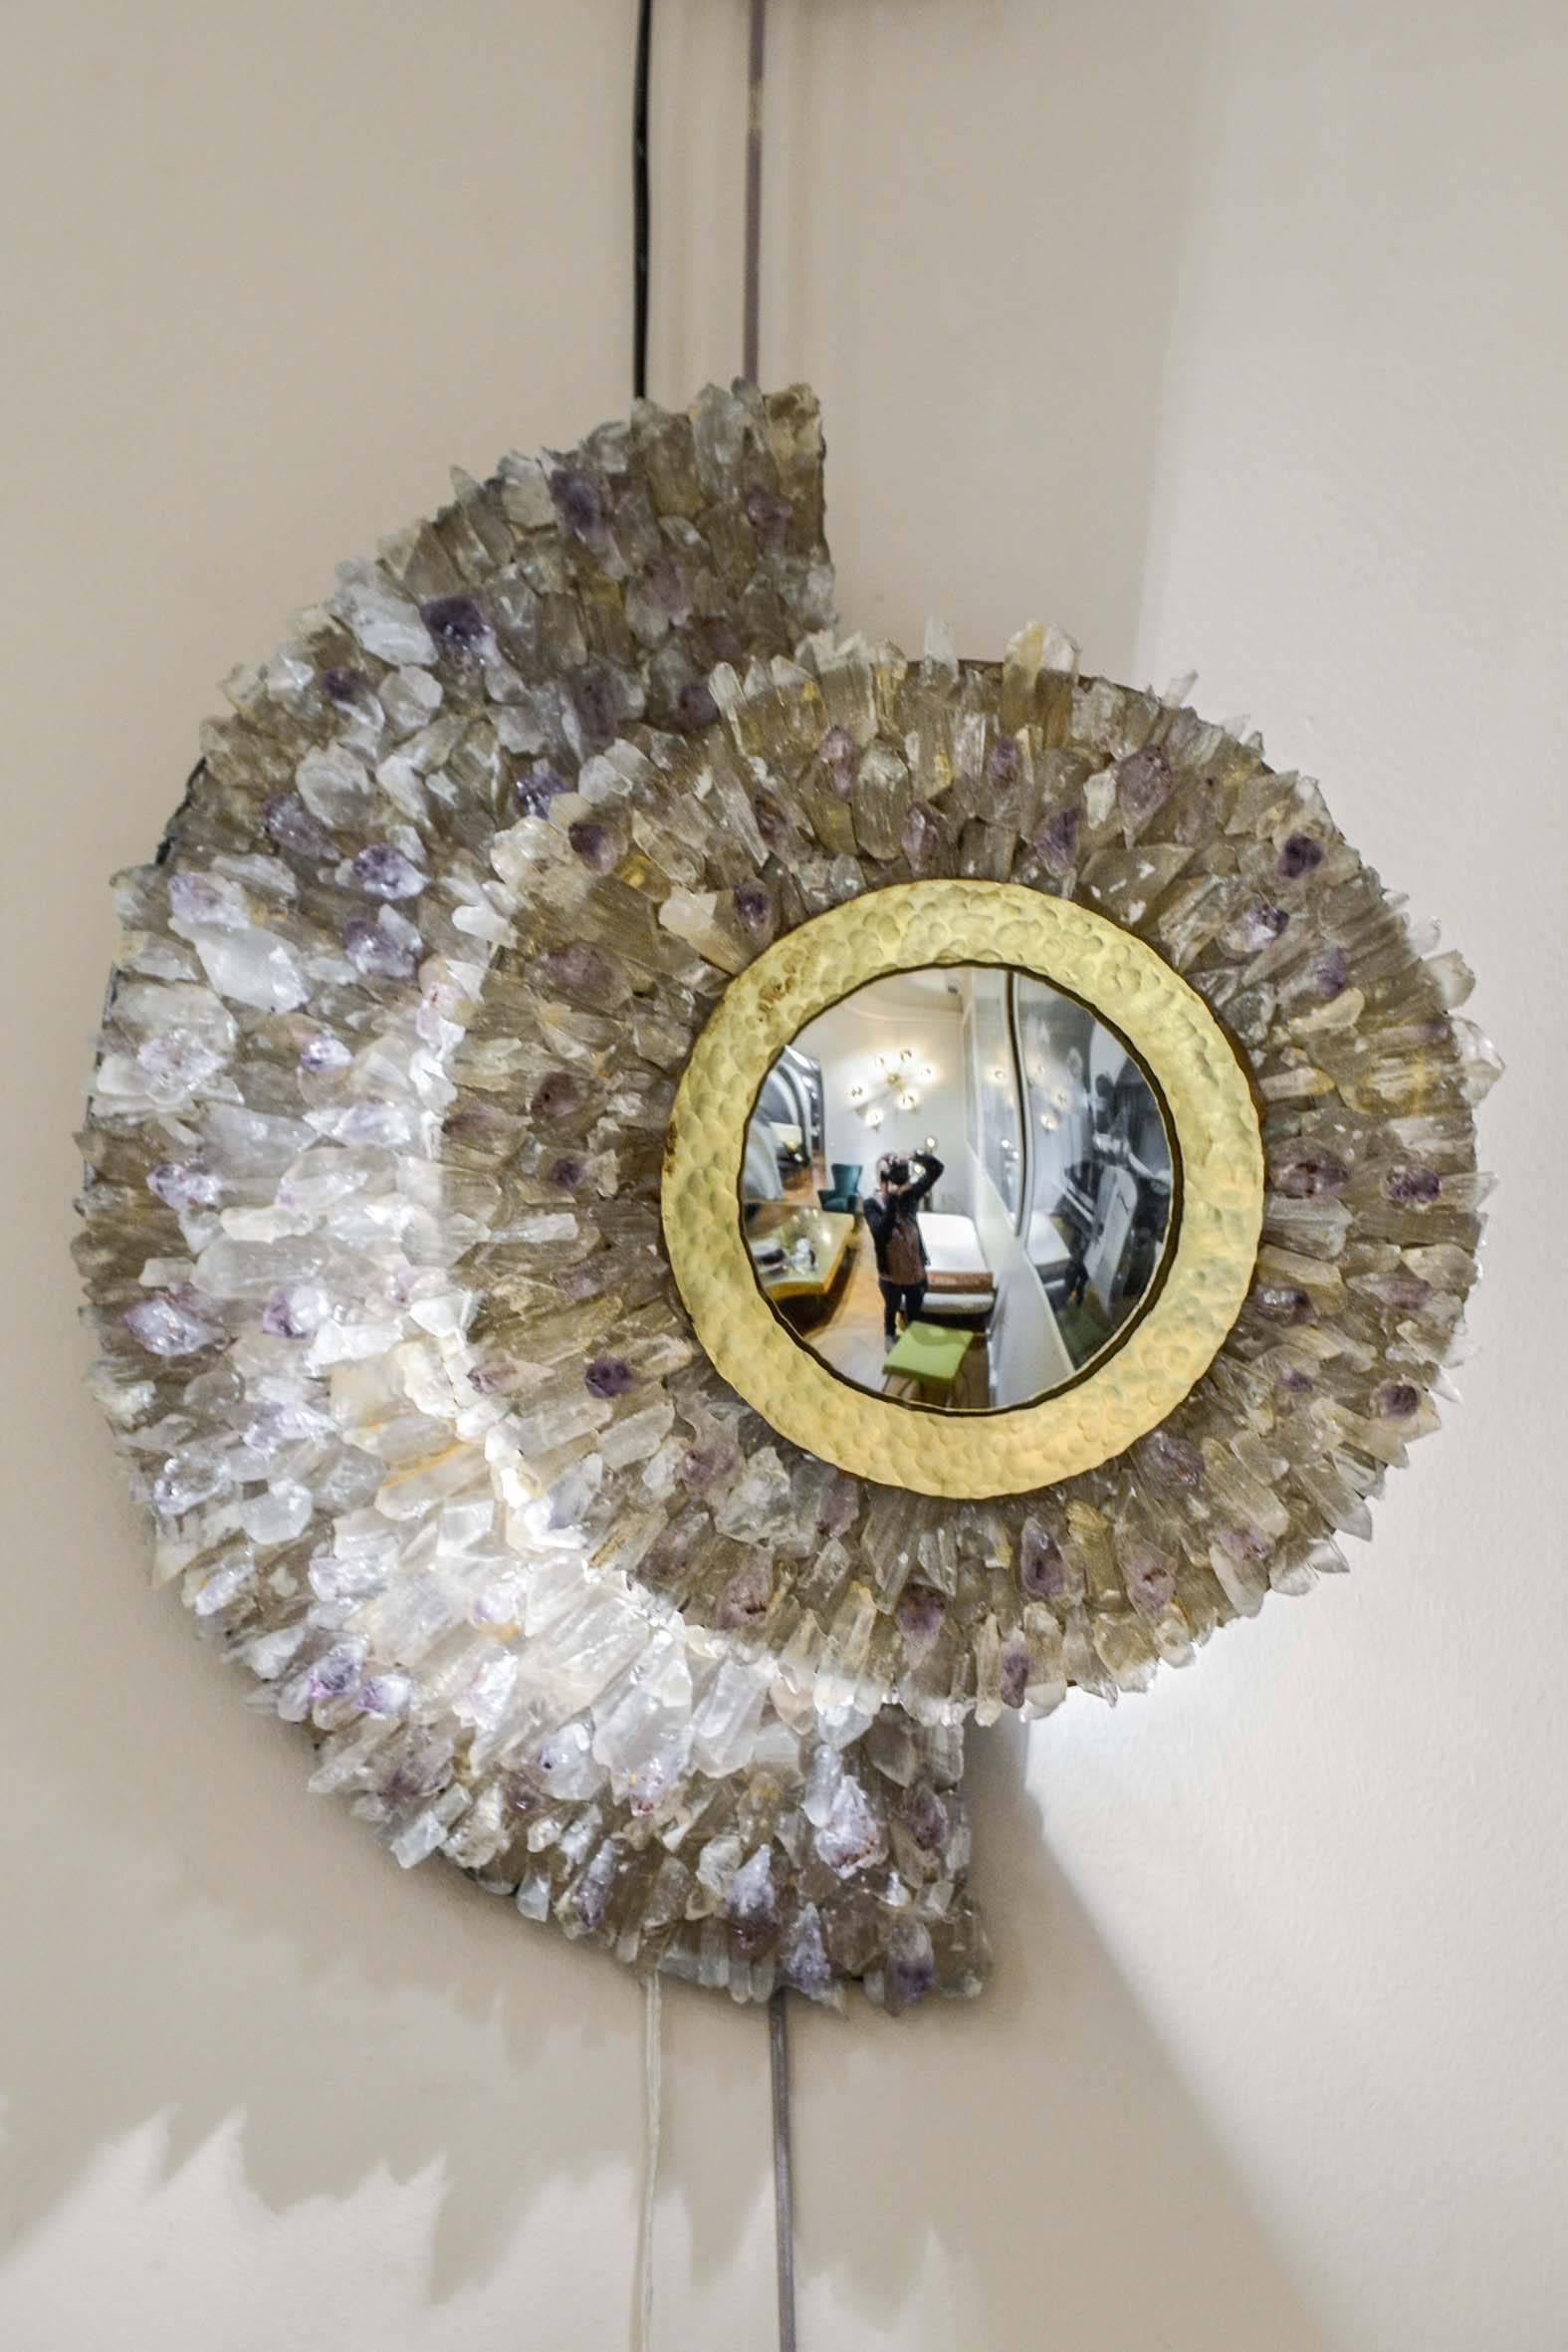 Pair of sconces with center in curved mirror, framed by a gilt circle with crystal rock and amethyst stones, unique pieces.